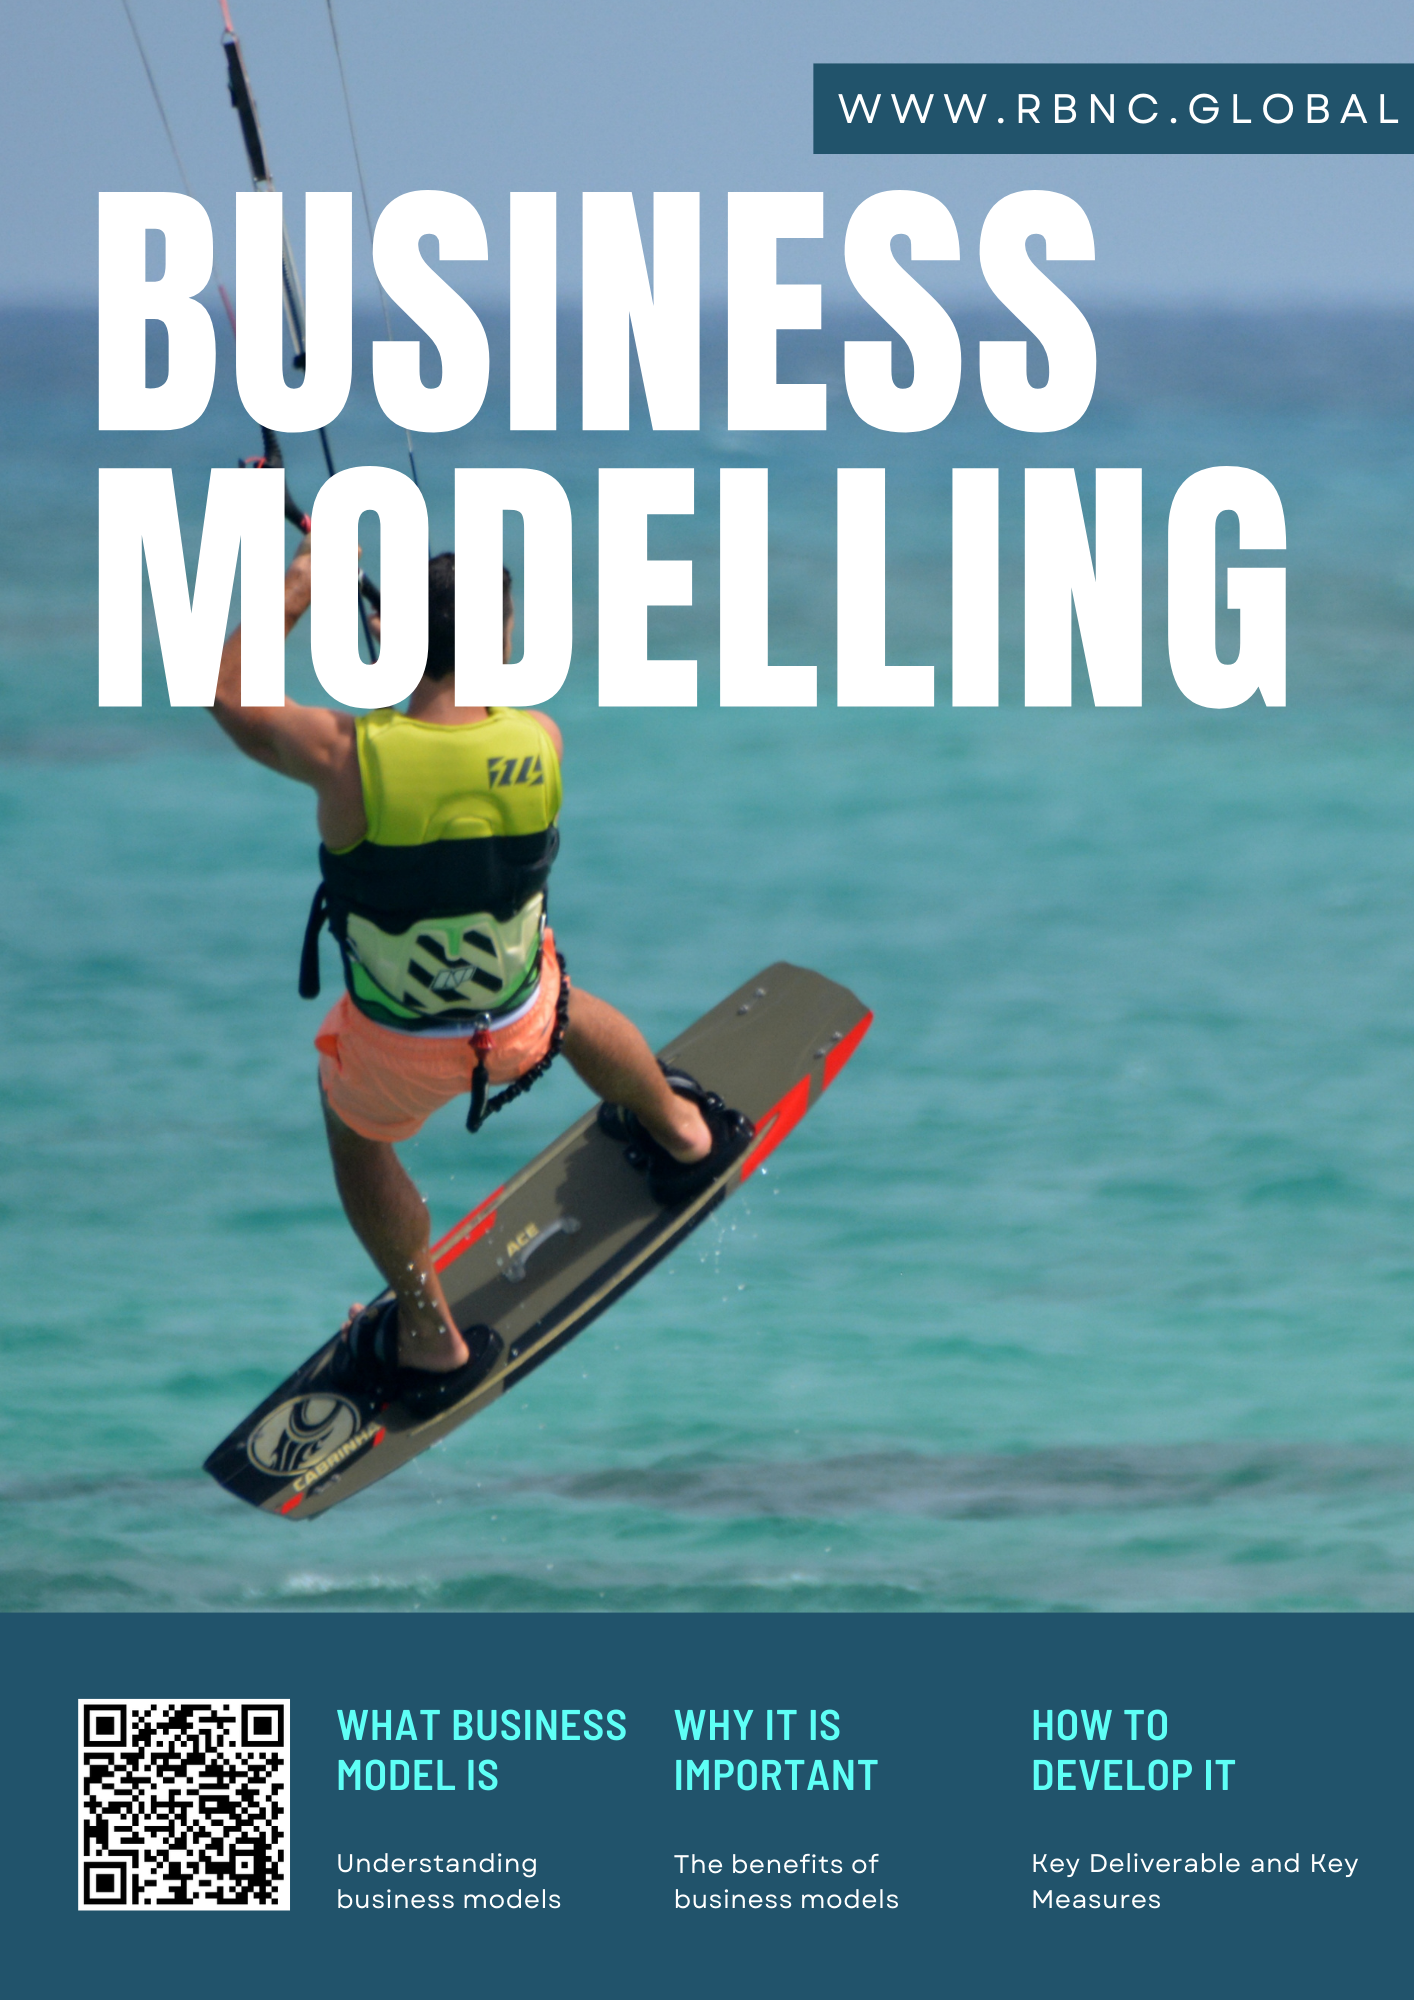 Business Modeling for Startup or Business Development